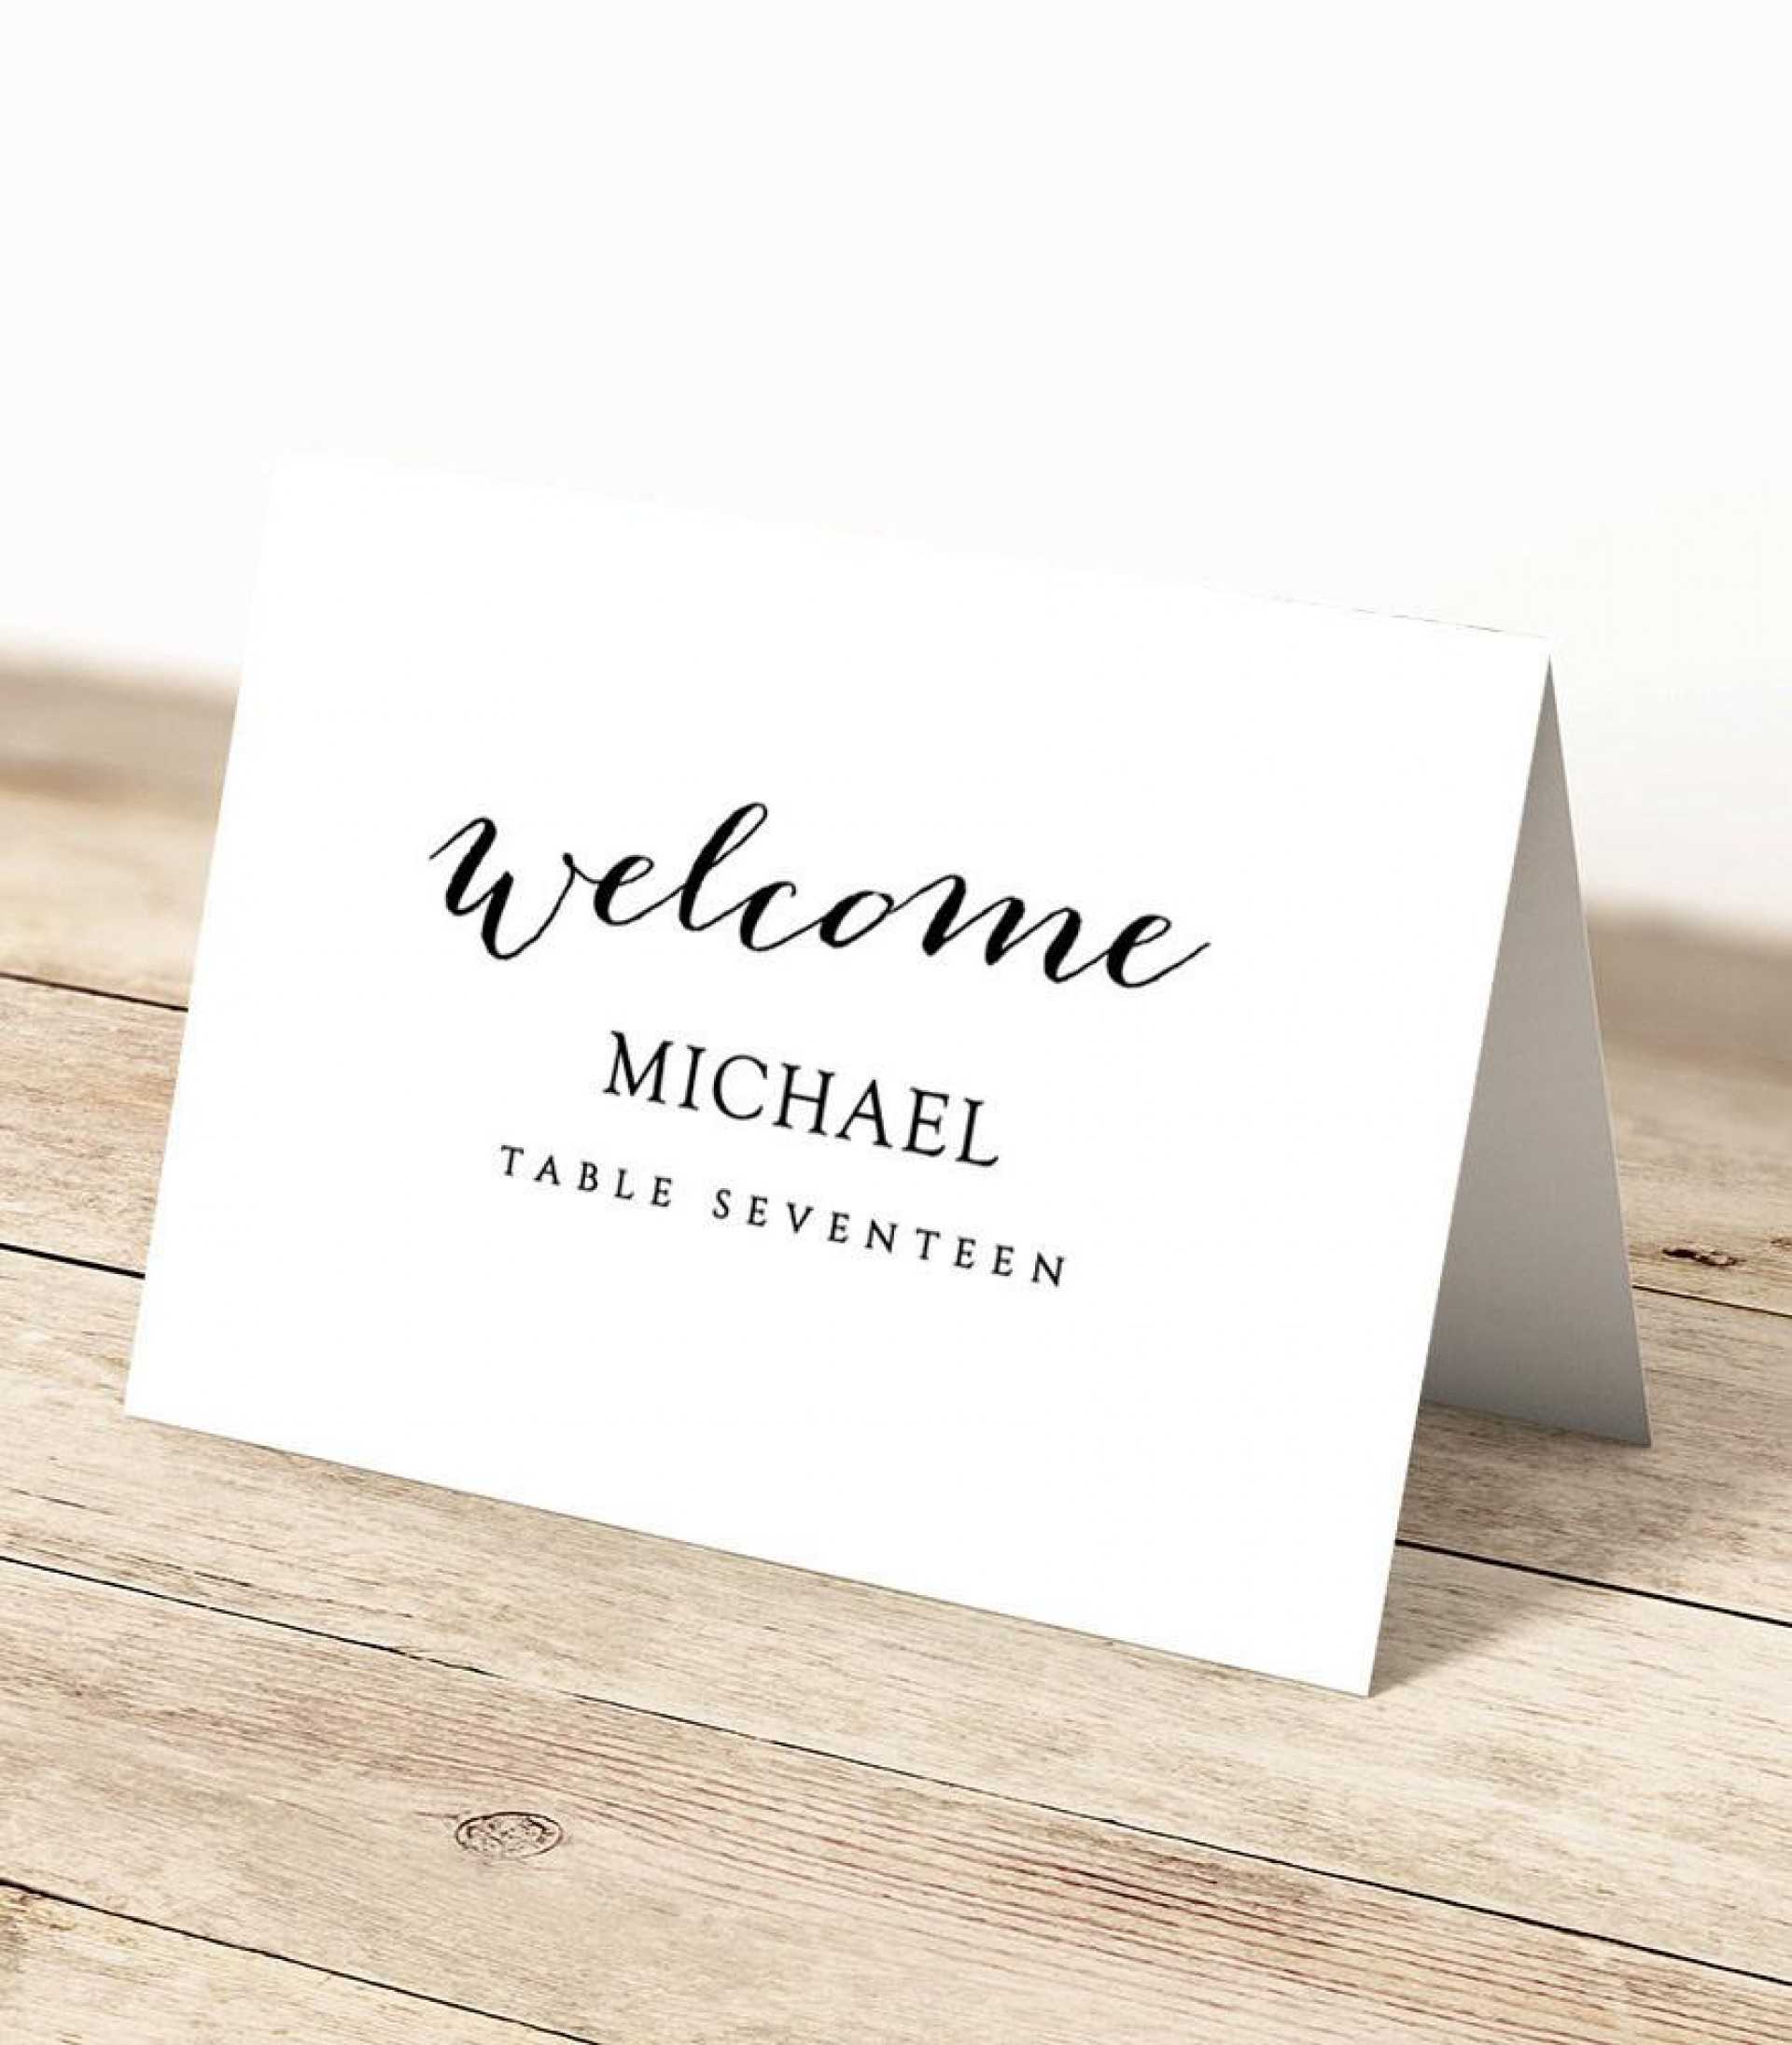 019 Template For Place Cards Il Fullxfull 1542140750 Dg3V Inside Place Card Template Free 6 Per Page